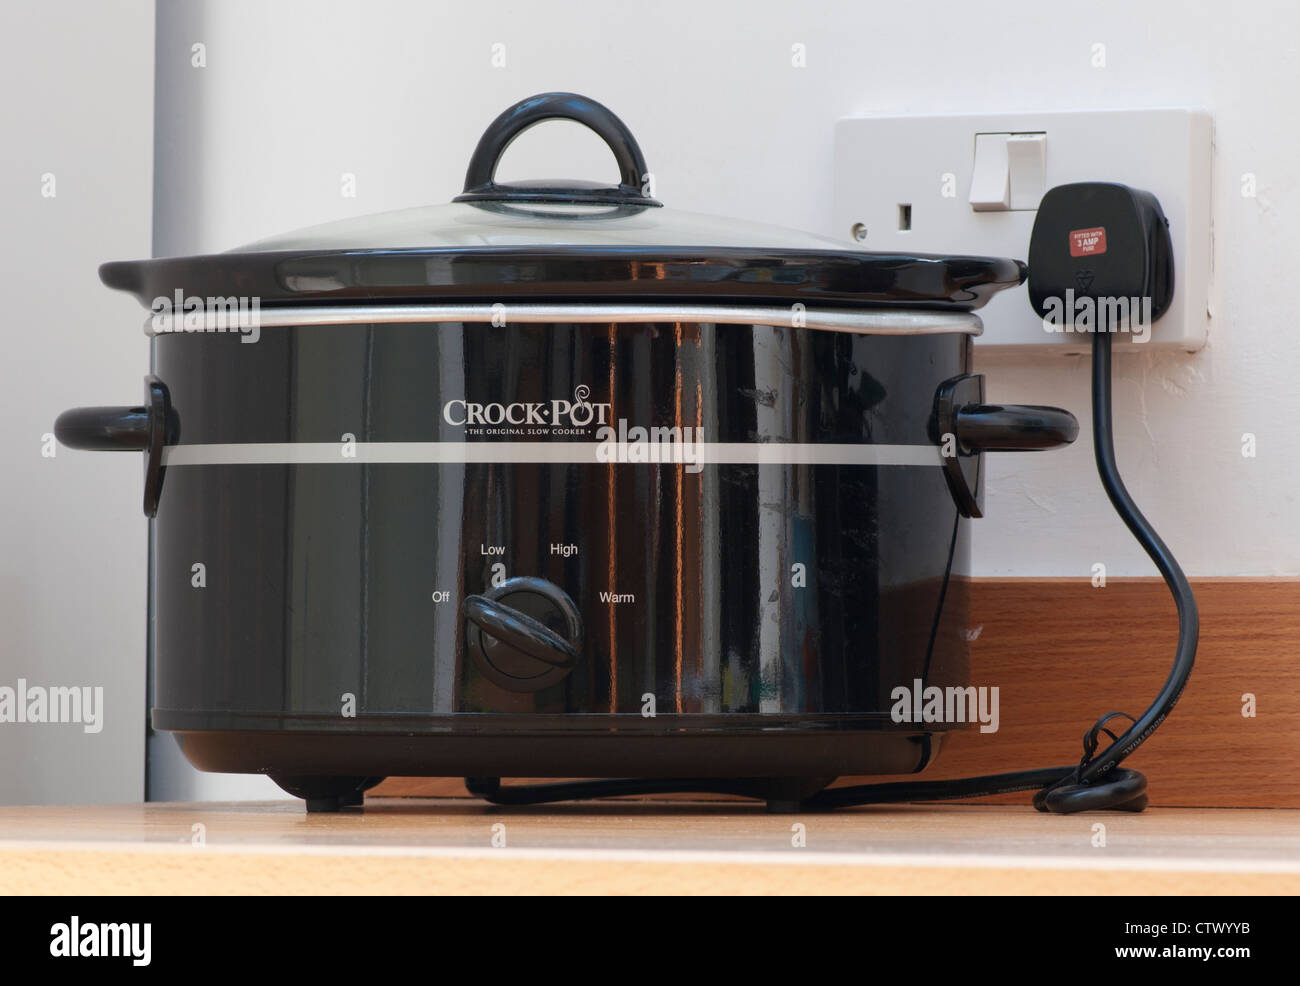 10,635 Slow Cooker Images, Stock Photos, 3D objects, & Vectors